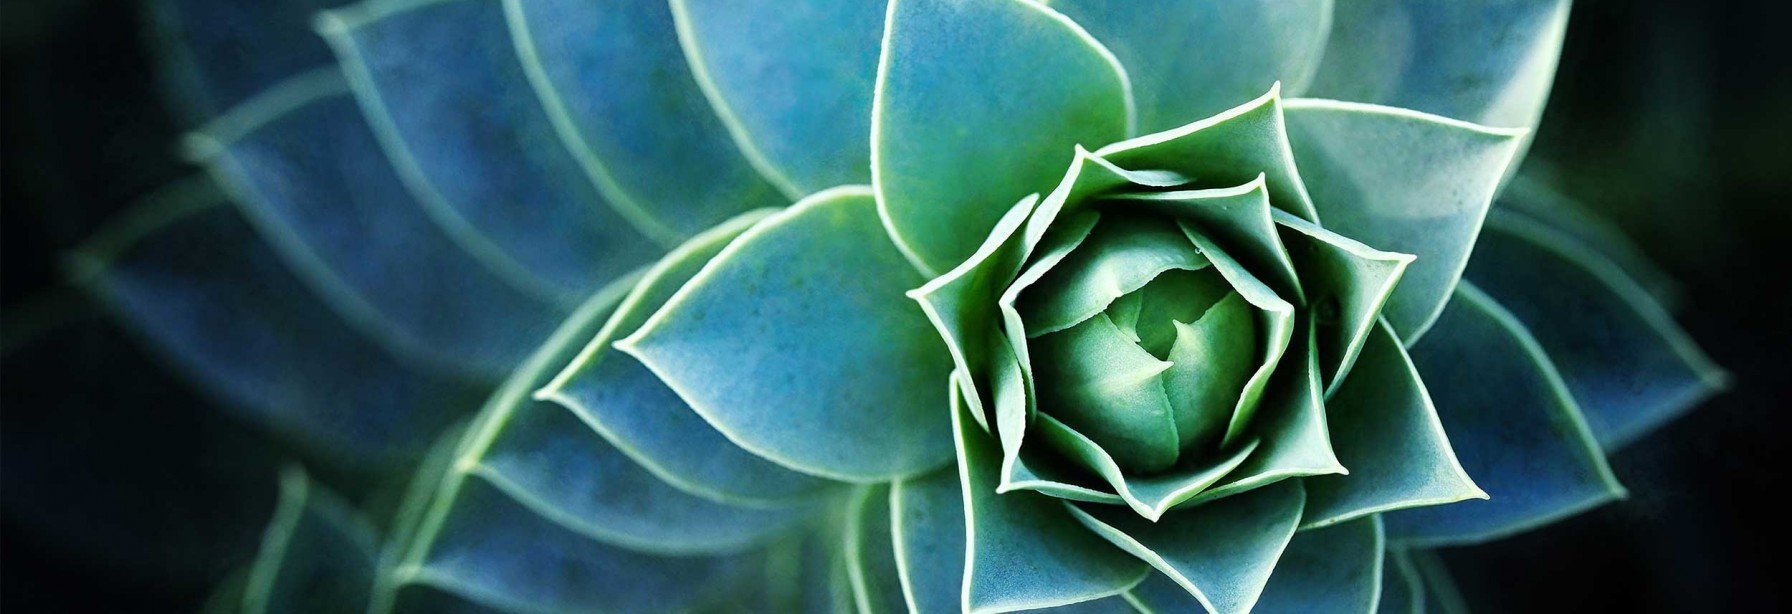 Green and blue spiral succulent plant seen from above.